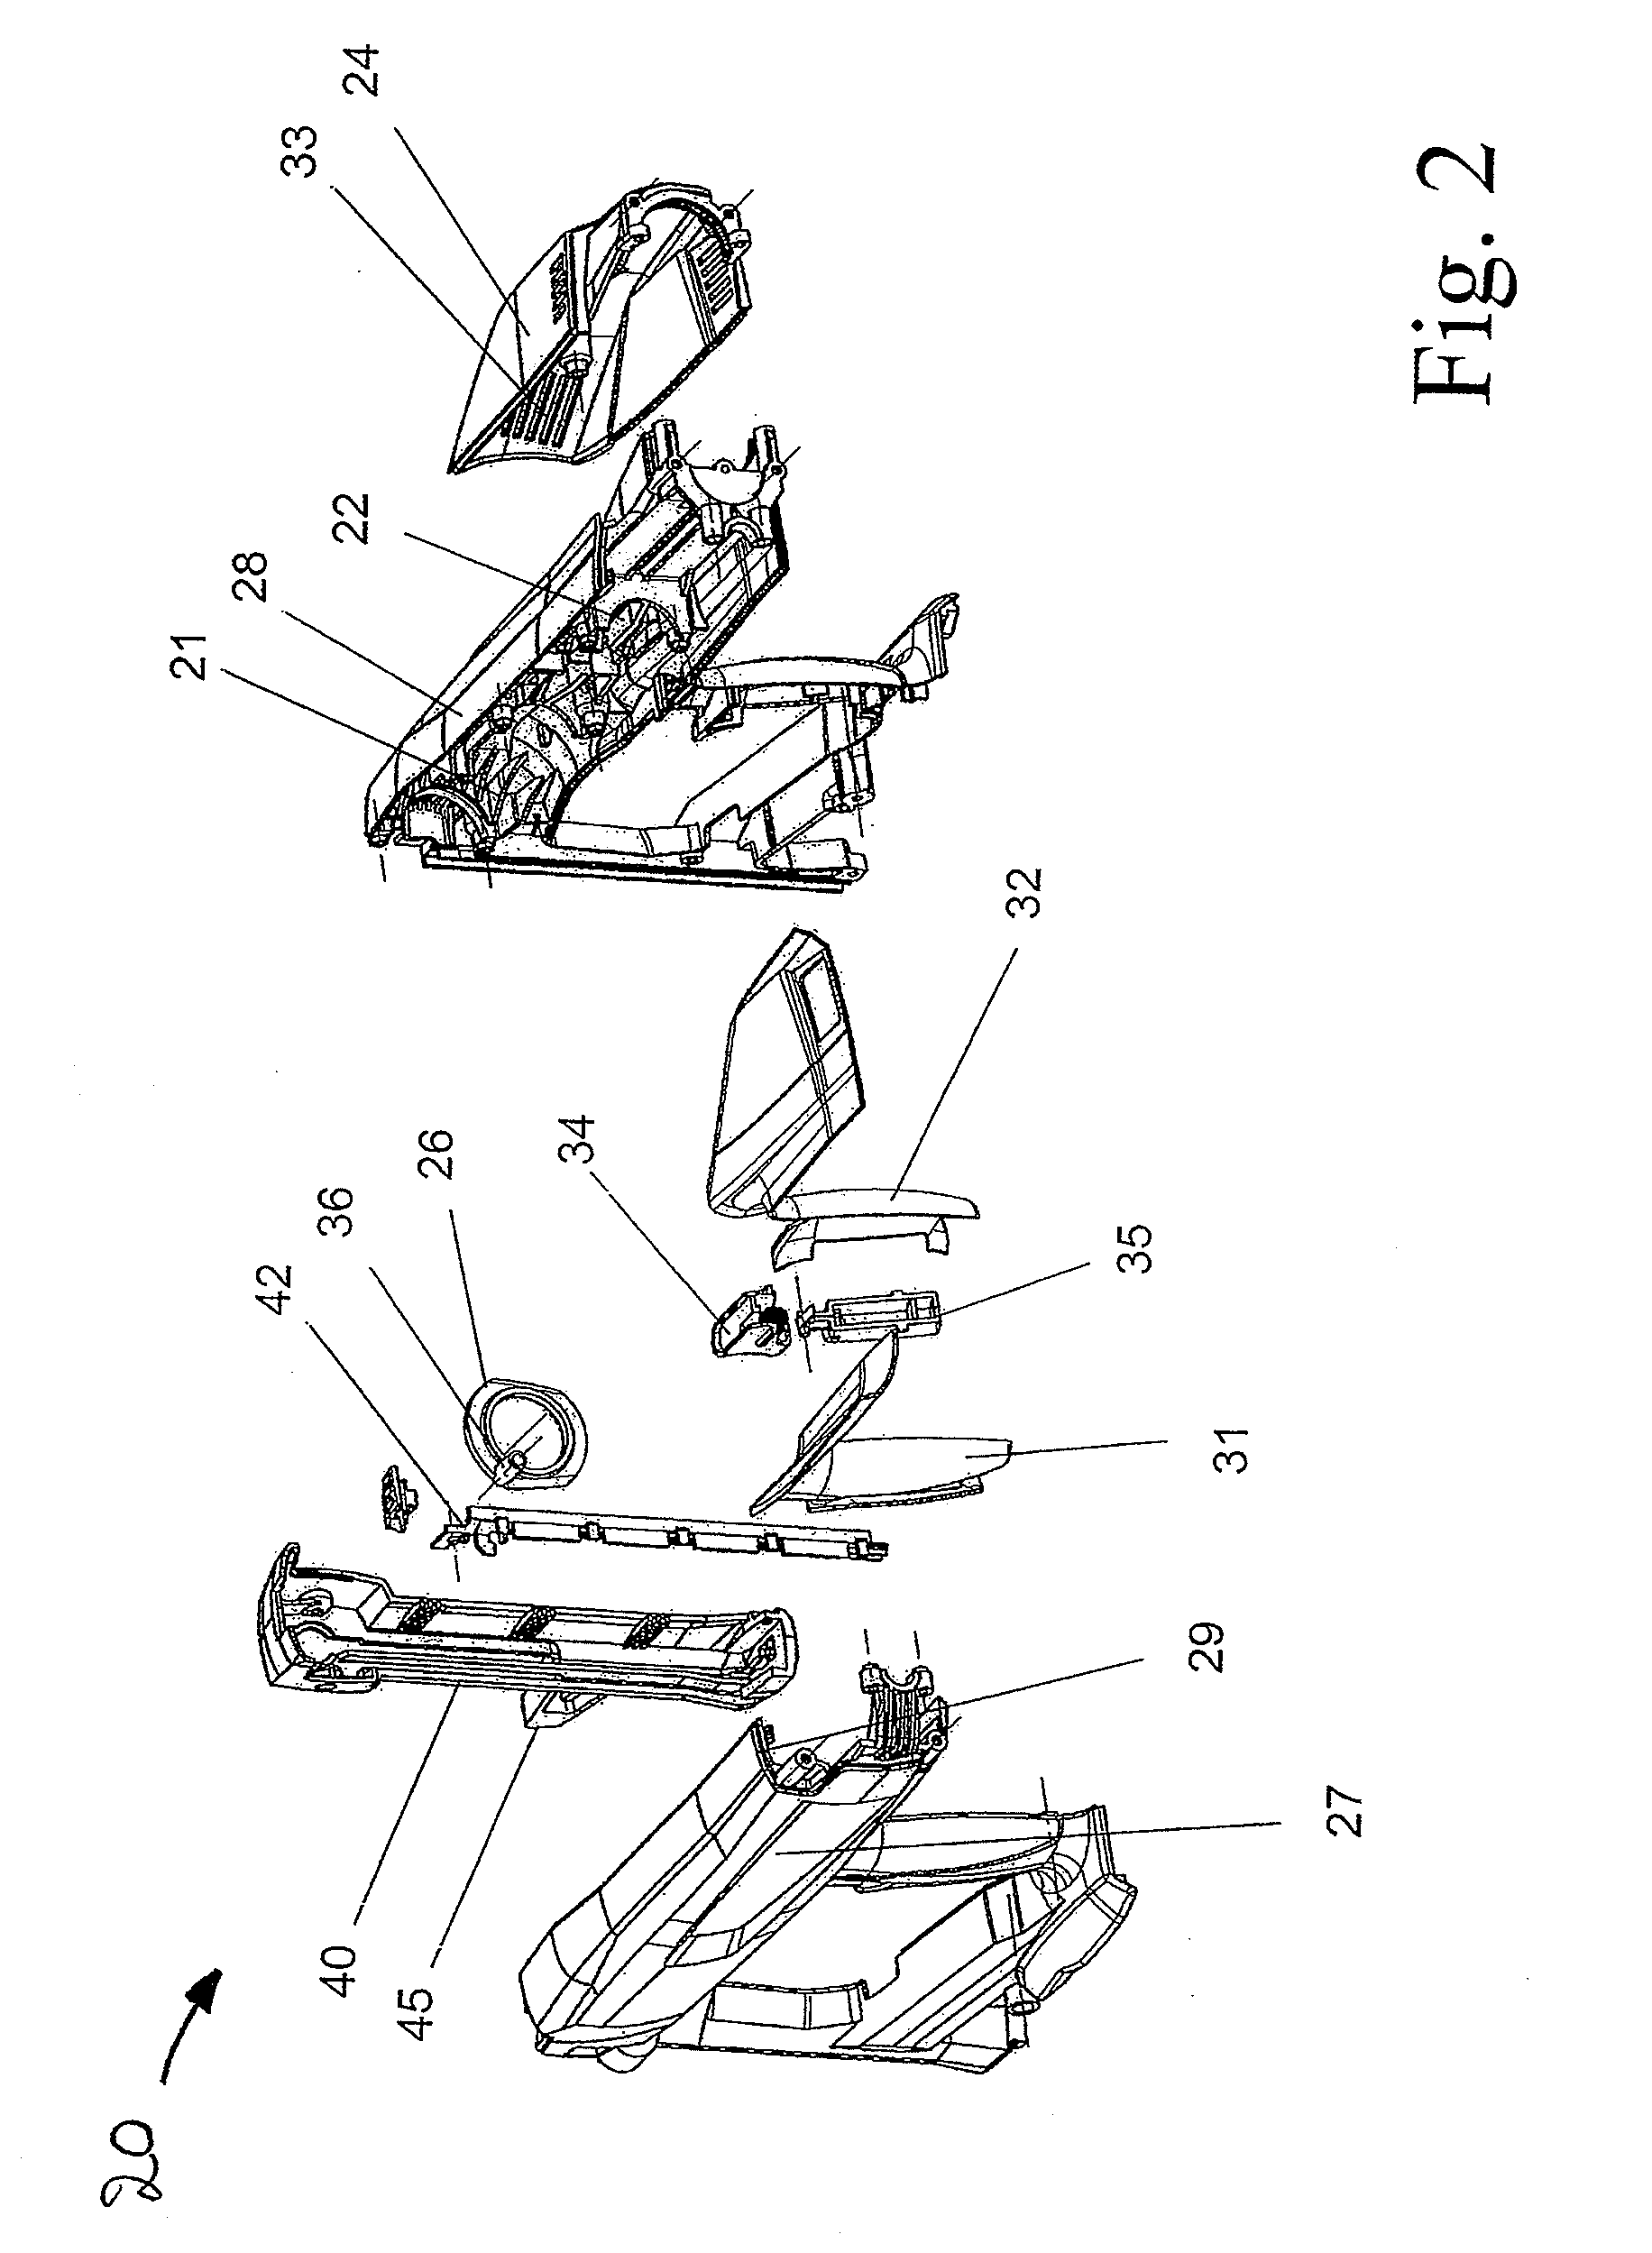 Driving device